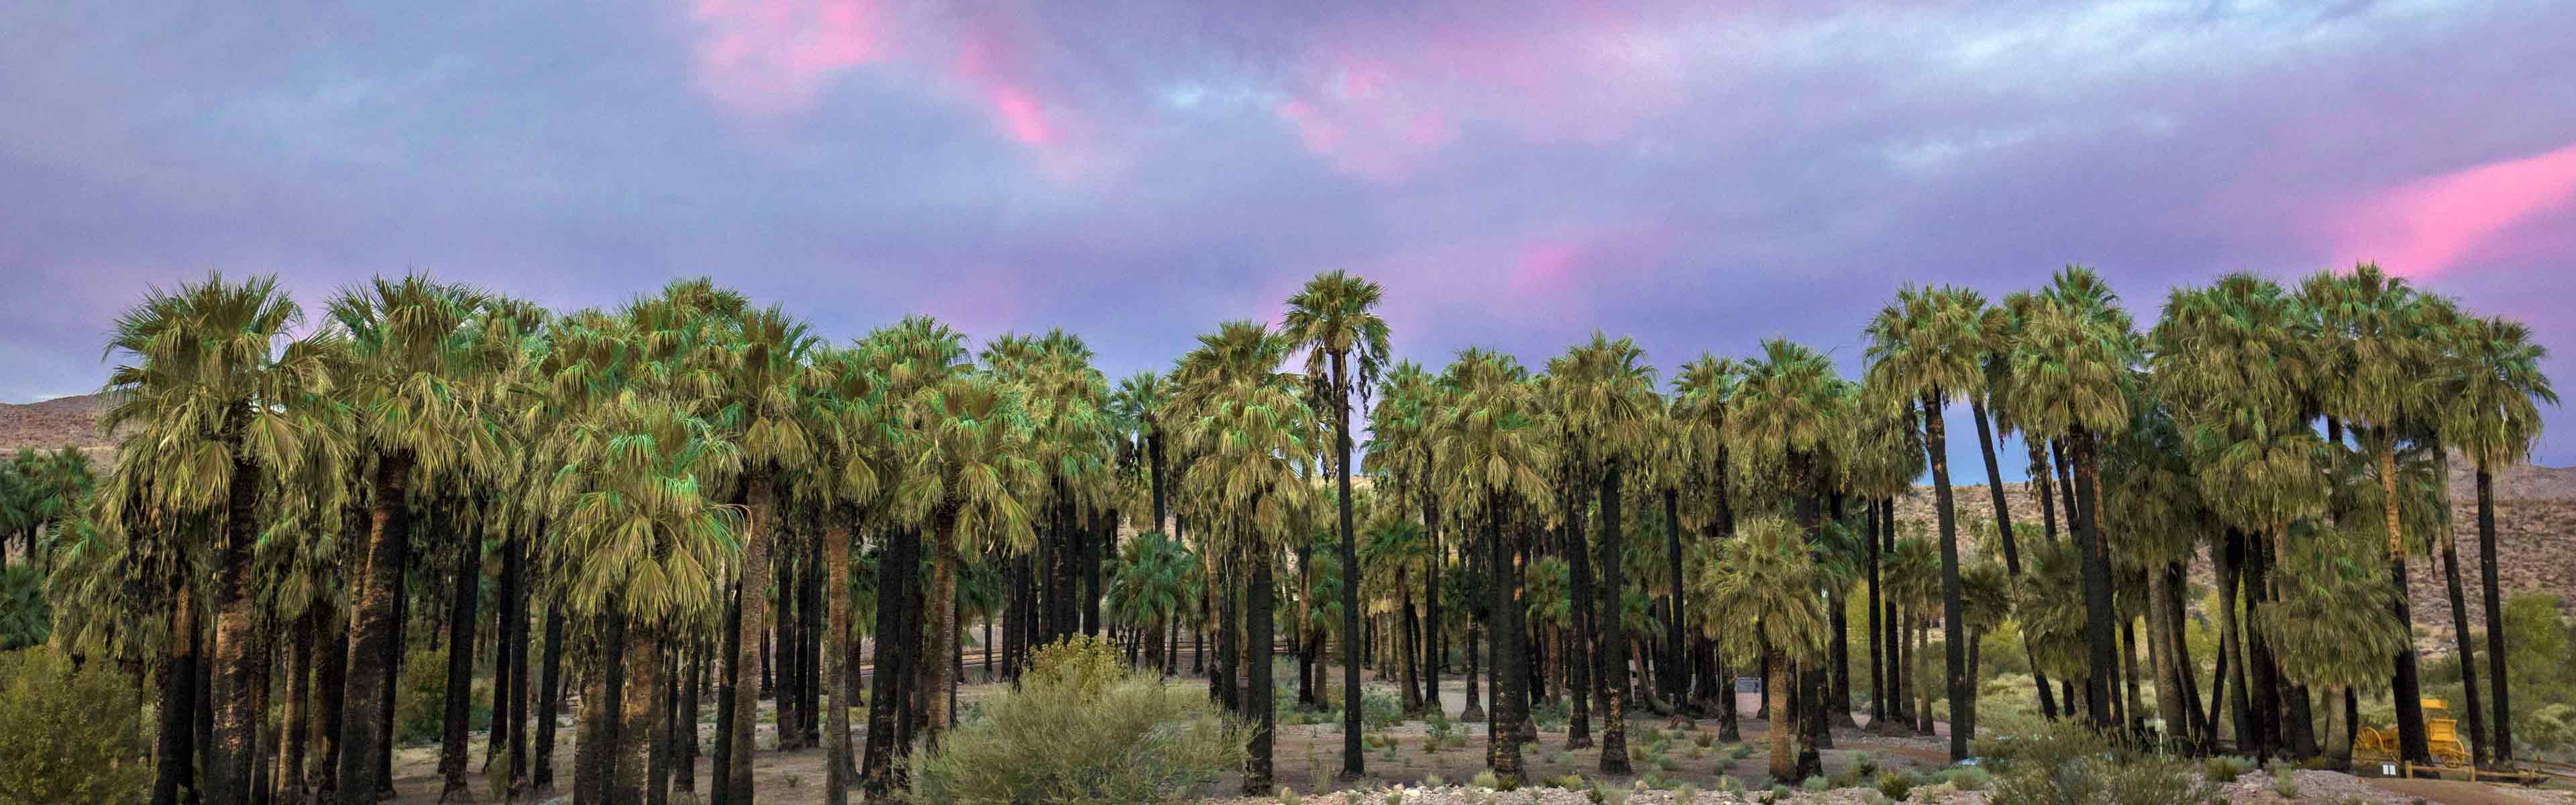 Rows of California fan palms at Warm Springs Natural Area